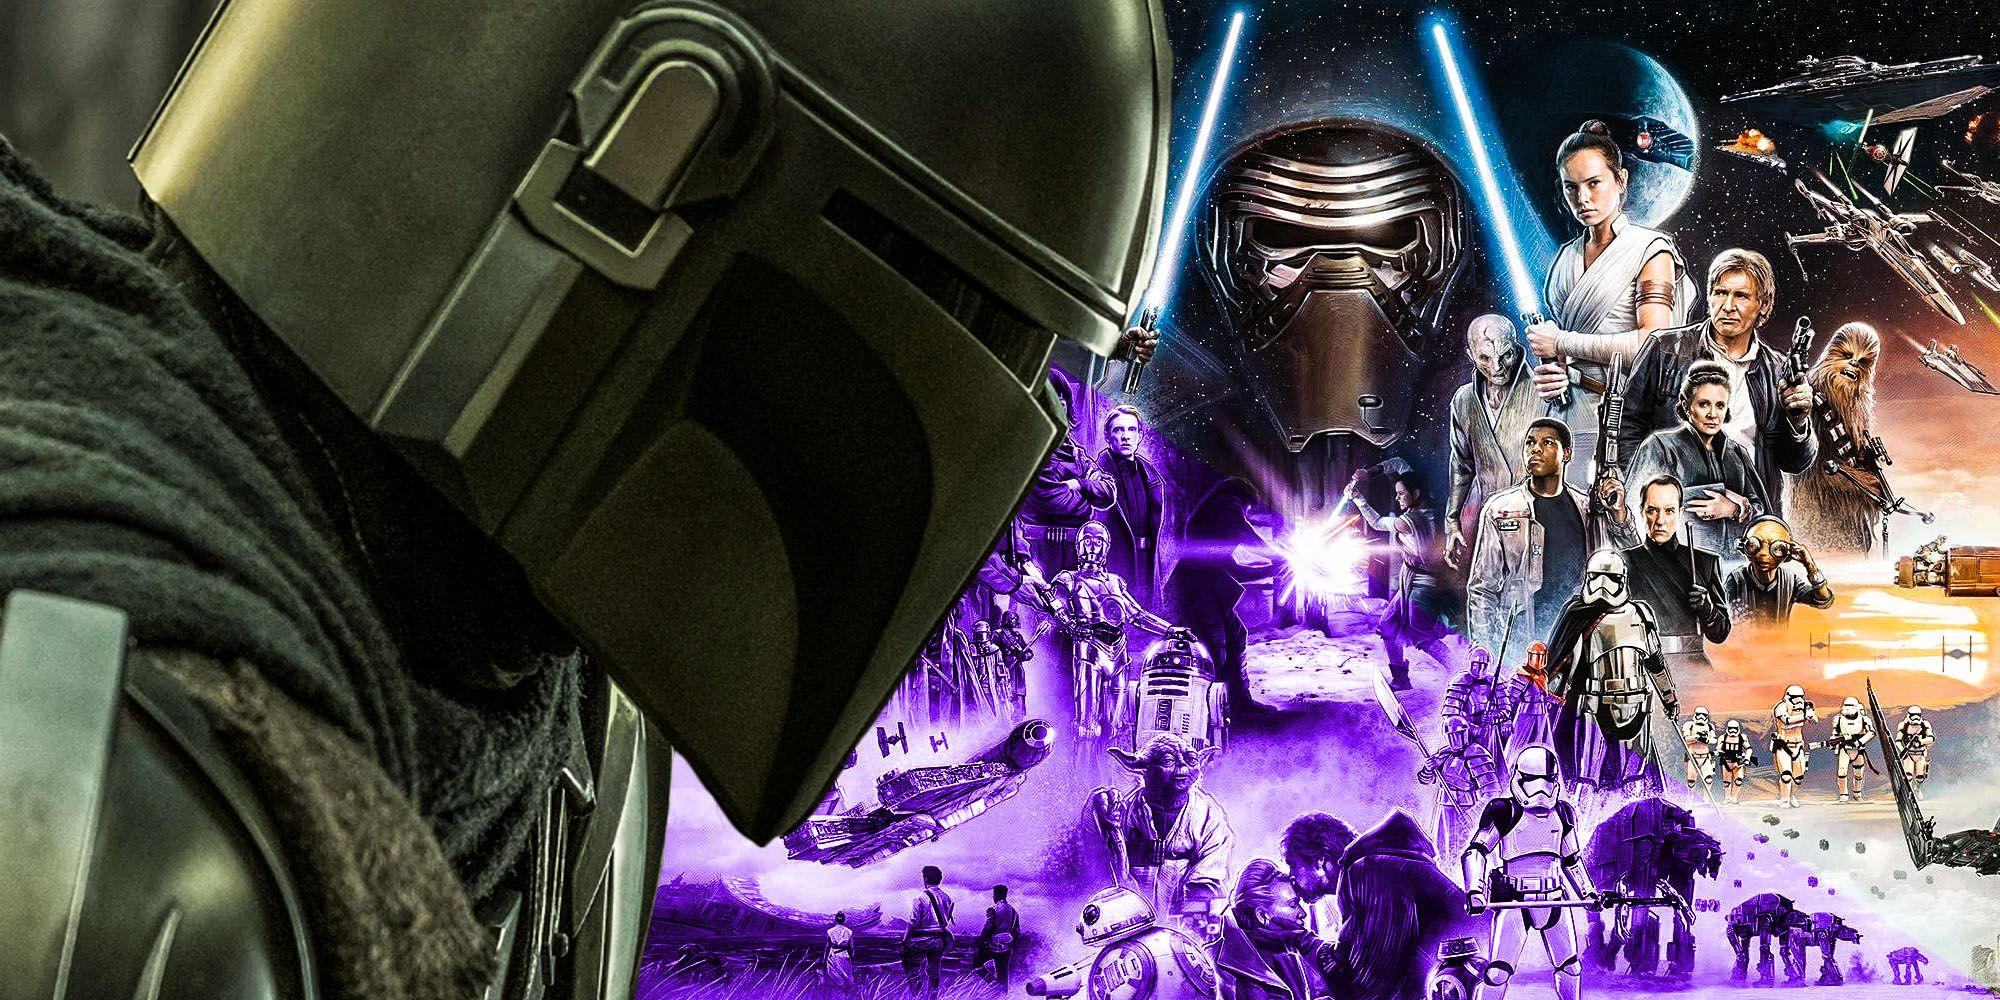 The mandalorian key to Star wars more than canon sequel trilogy